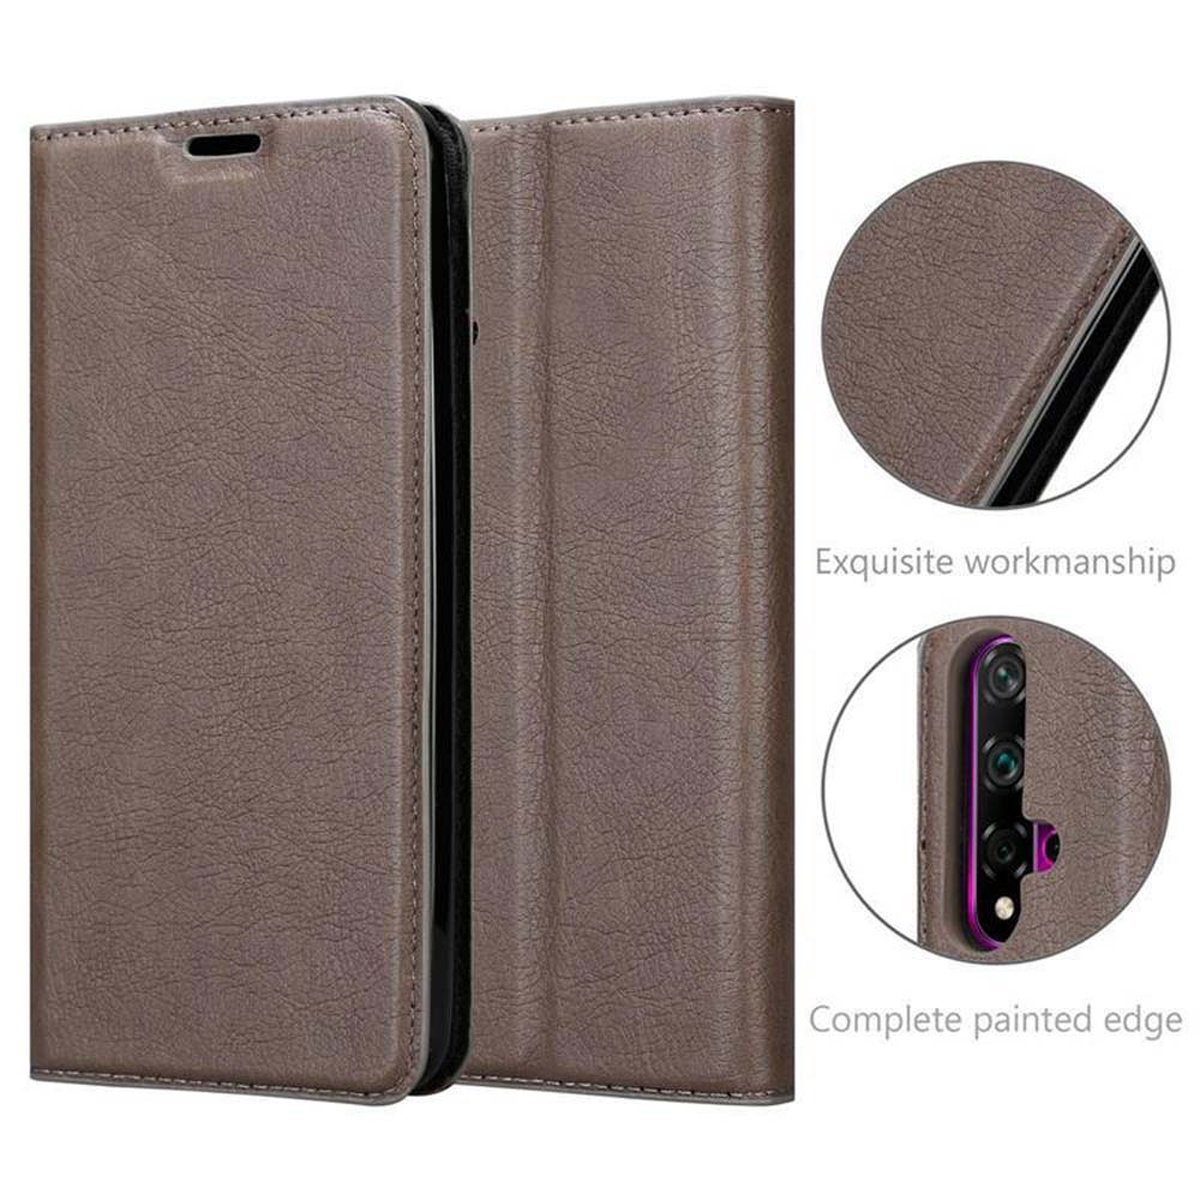 5T, 20 Honor, CADORABO KAFFEE Huawei Hülle Invisible Book / BRAUN 20S Magnet, / NOVA Bookcover,